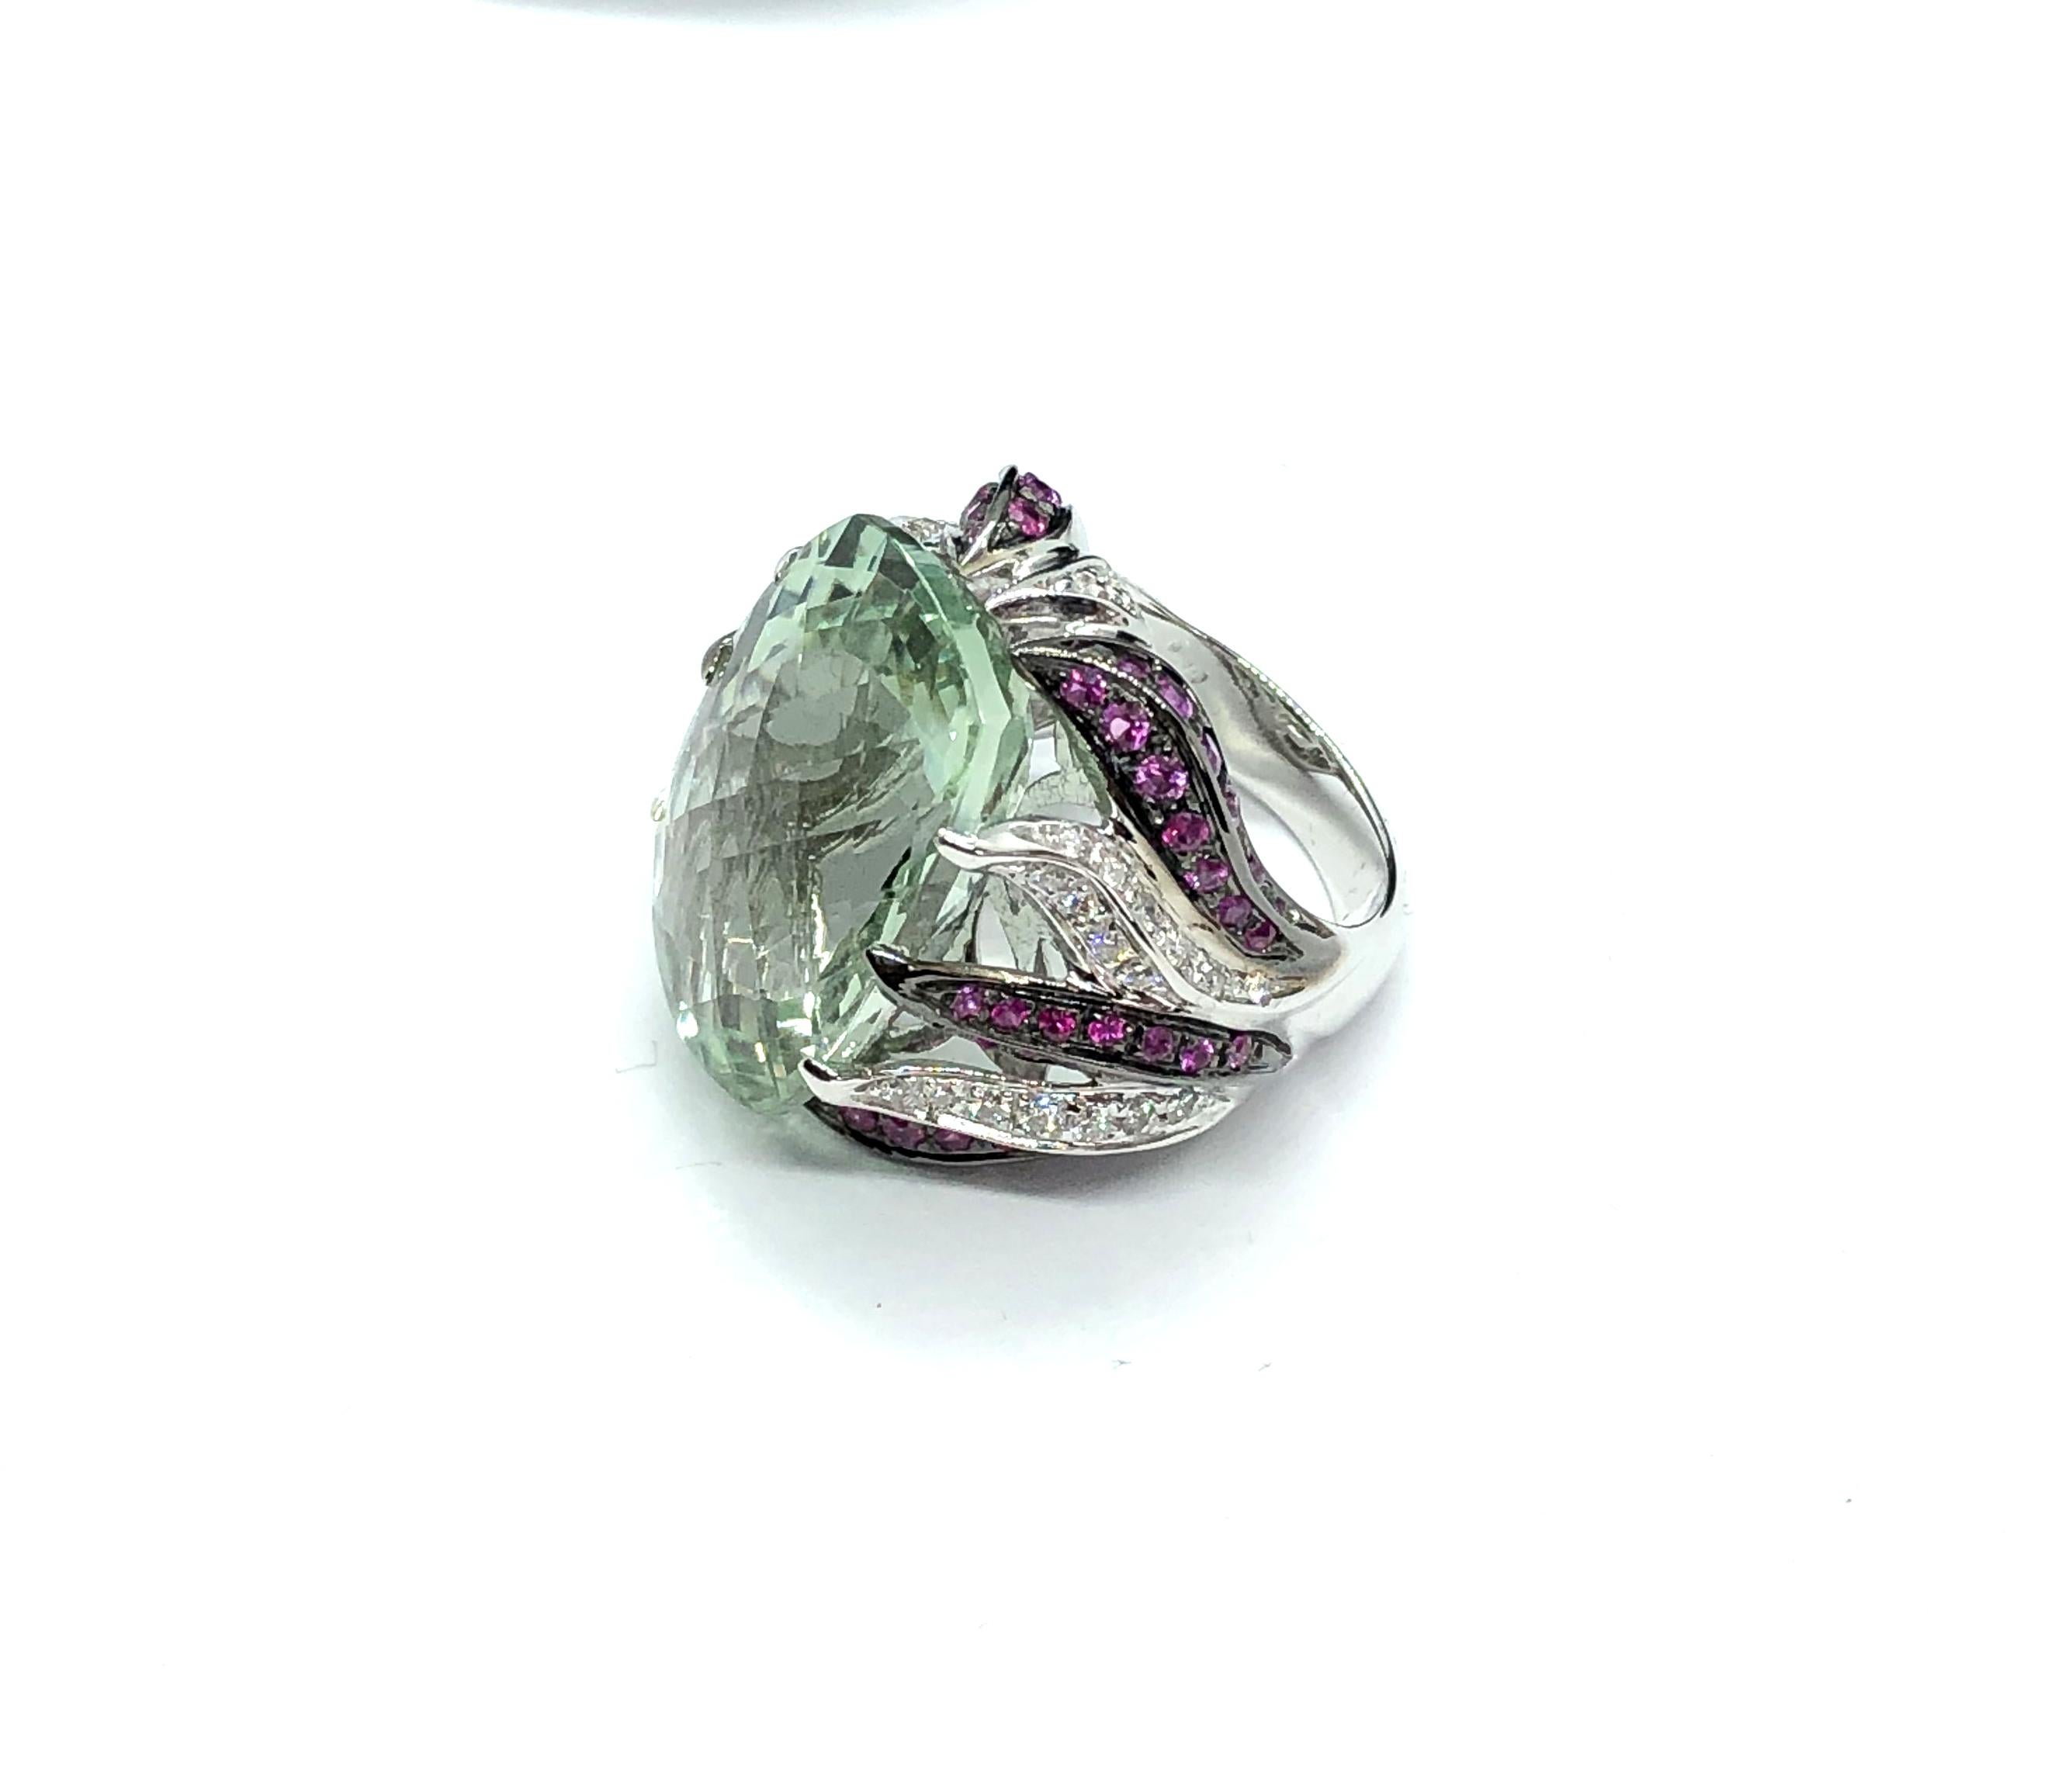 23 Ct Green Prasiolite White Gold Cocktail Ring Diamond and Pink Sapphires Flame In New Condition For Sale In Valenza, IT